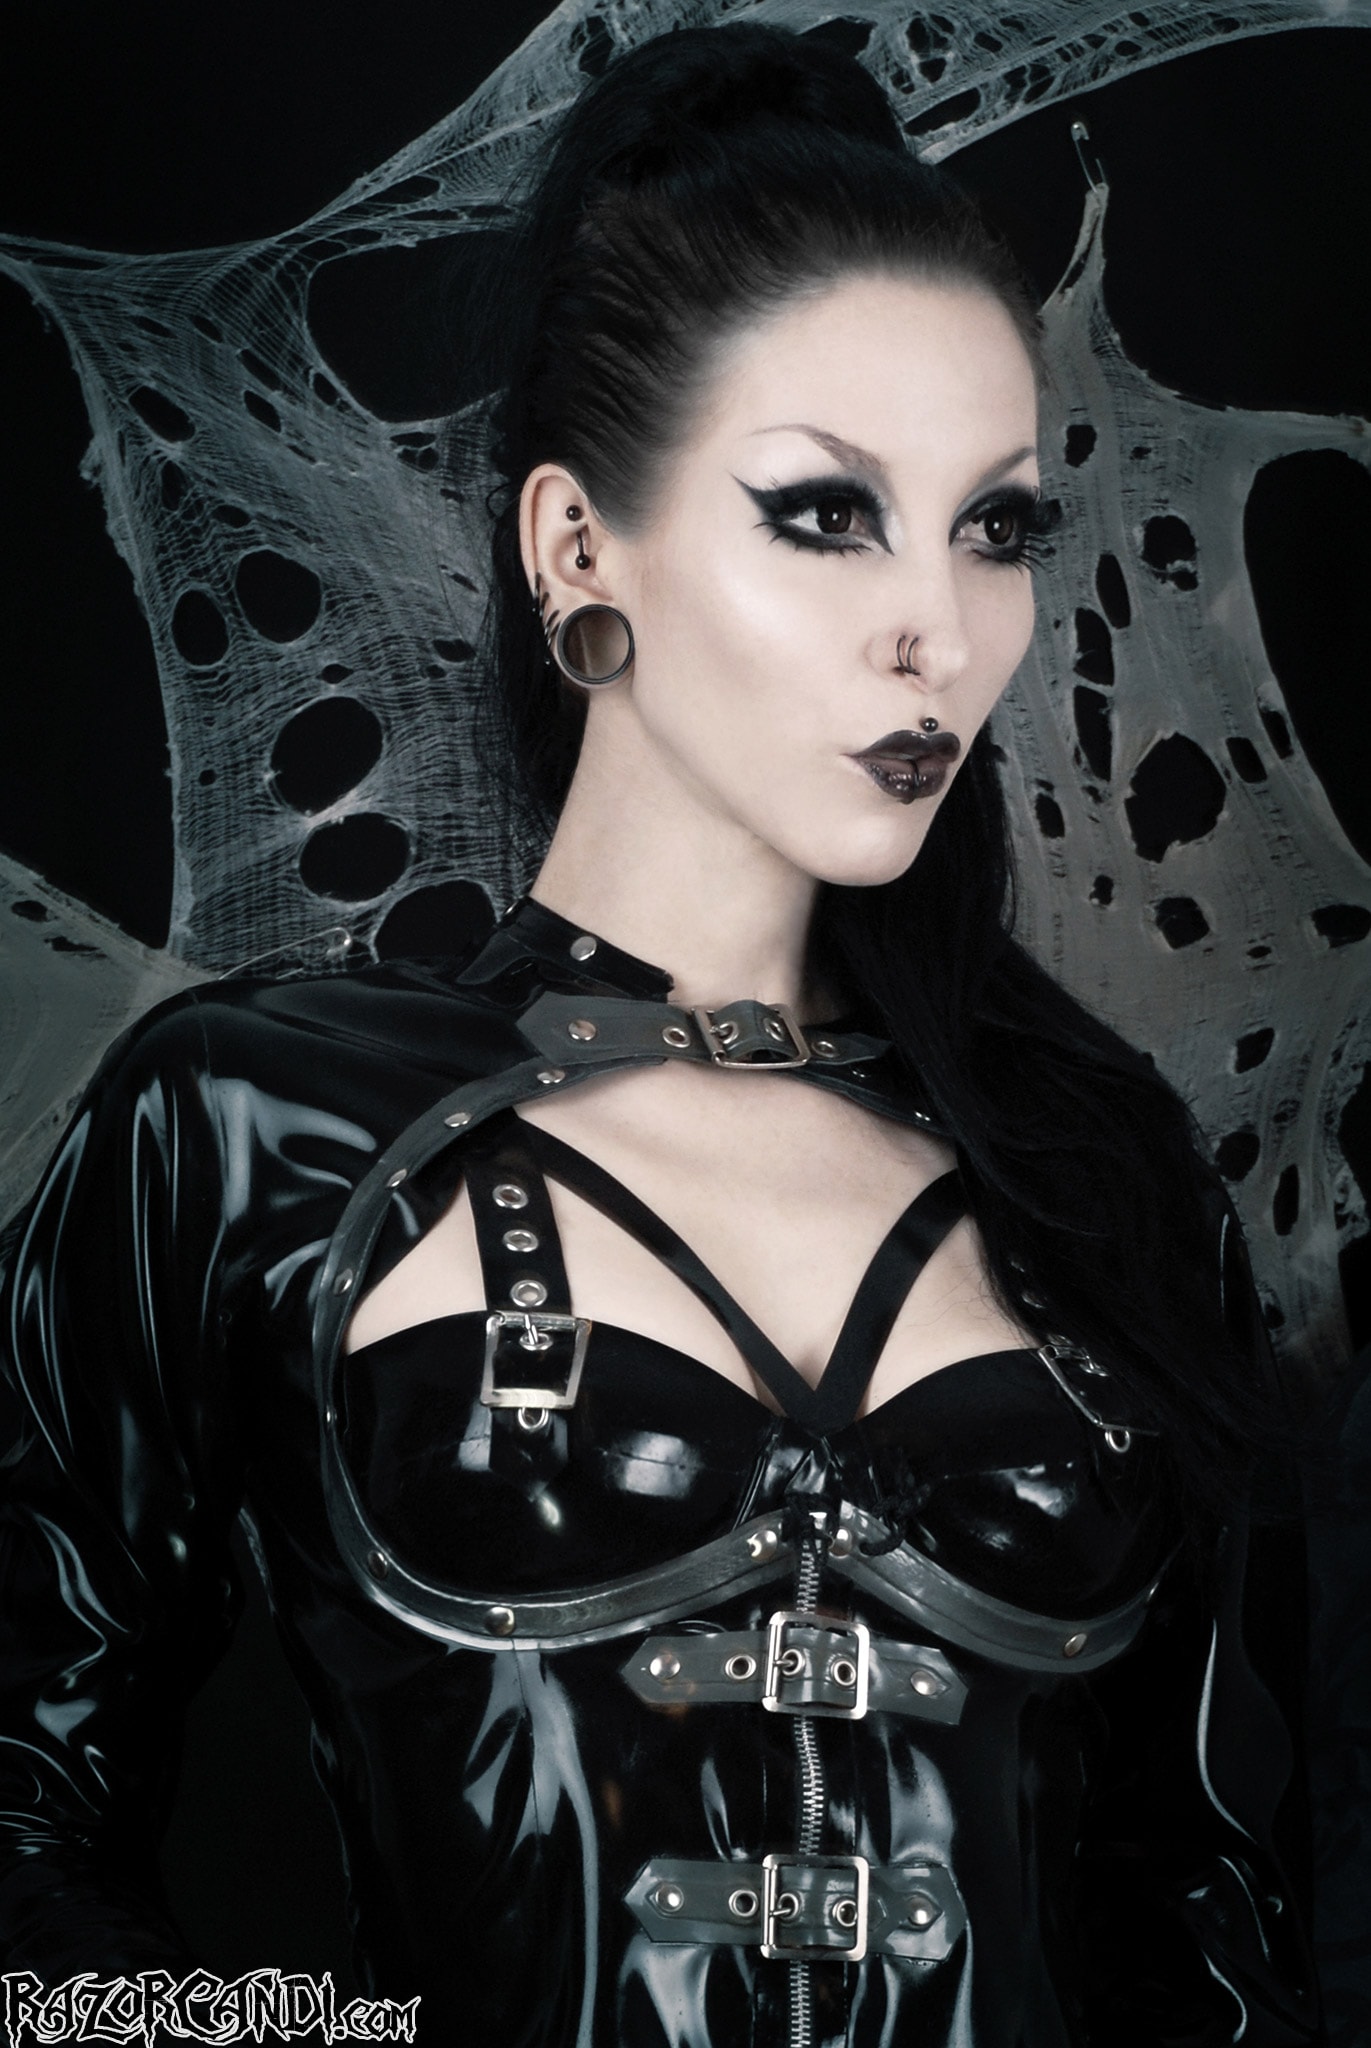 Razor Candi - Goth fetish babe in latex with nipple-clamps | Picture (2)